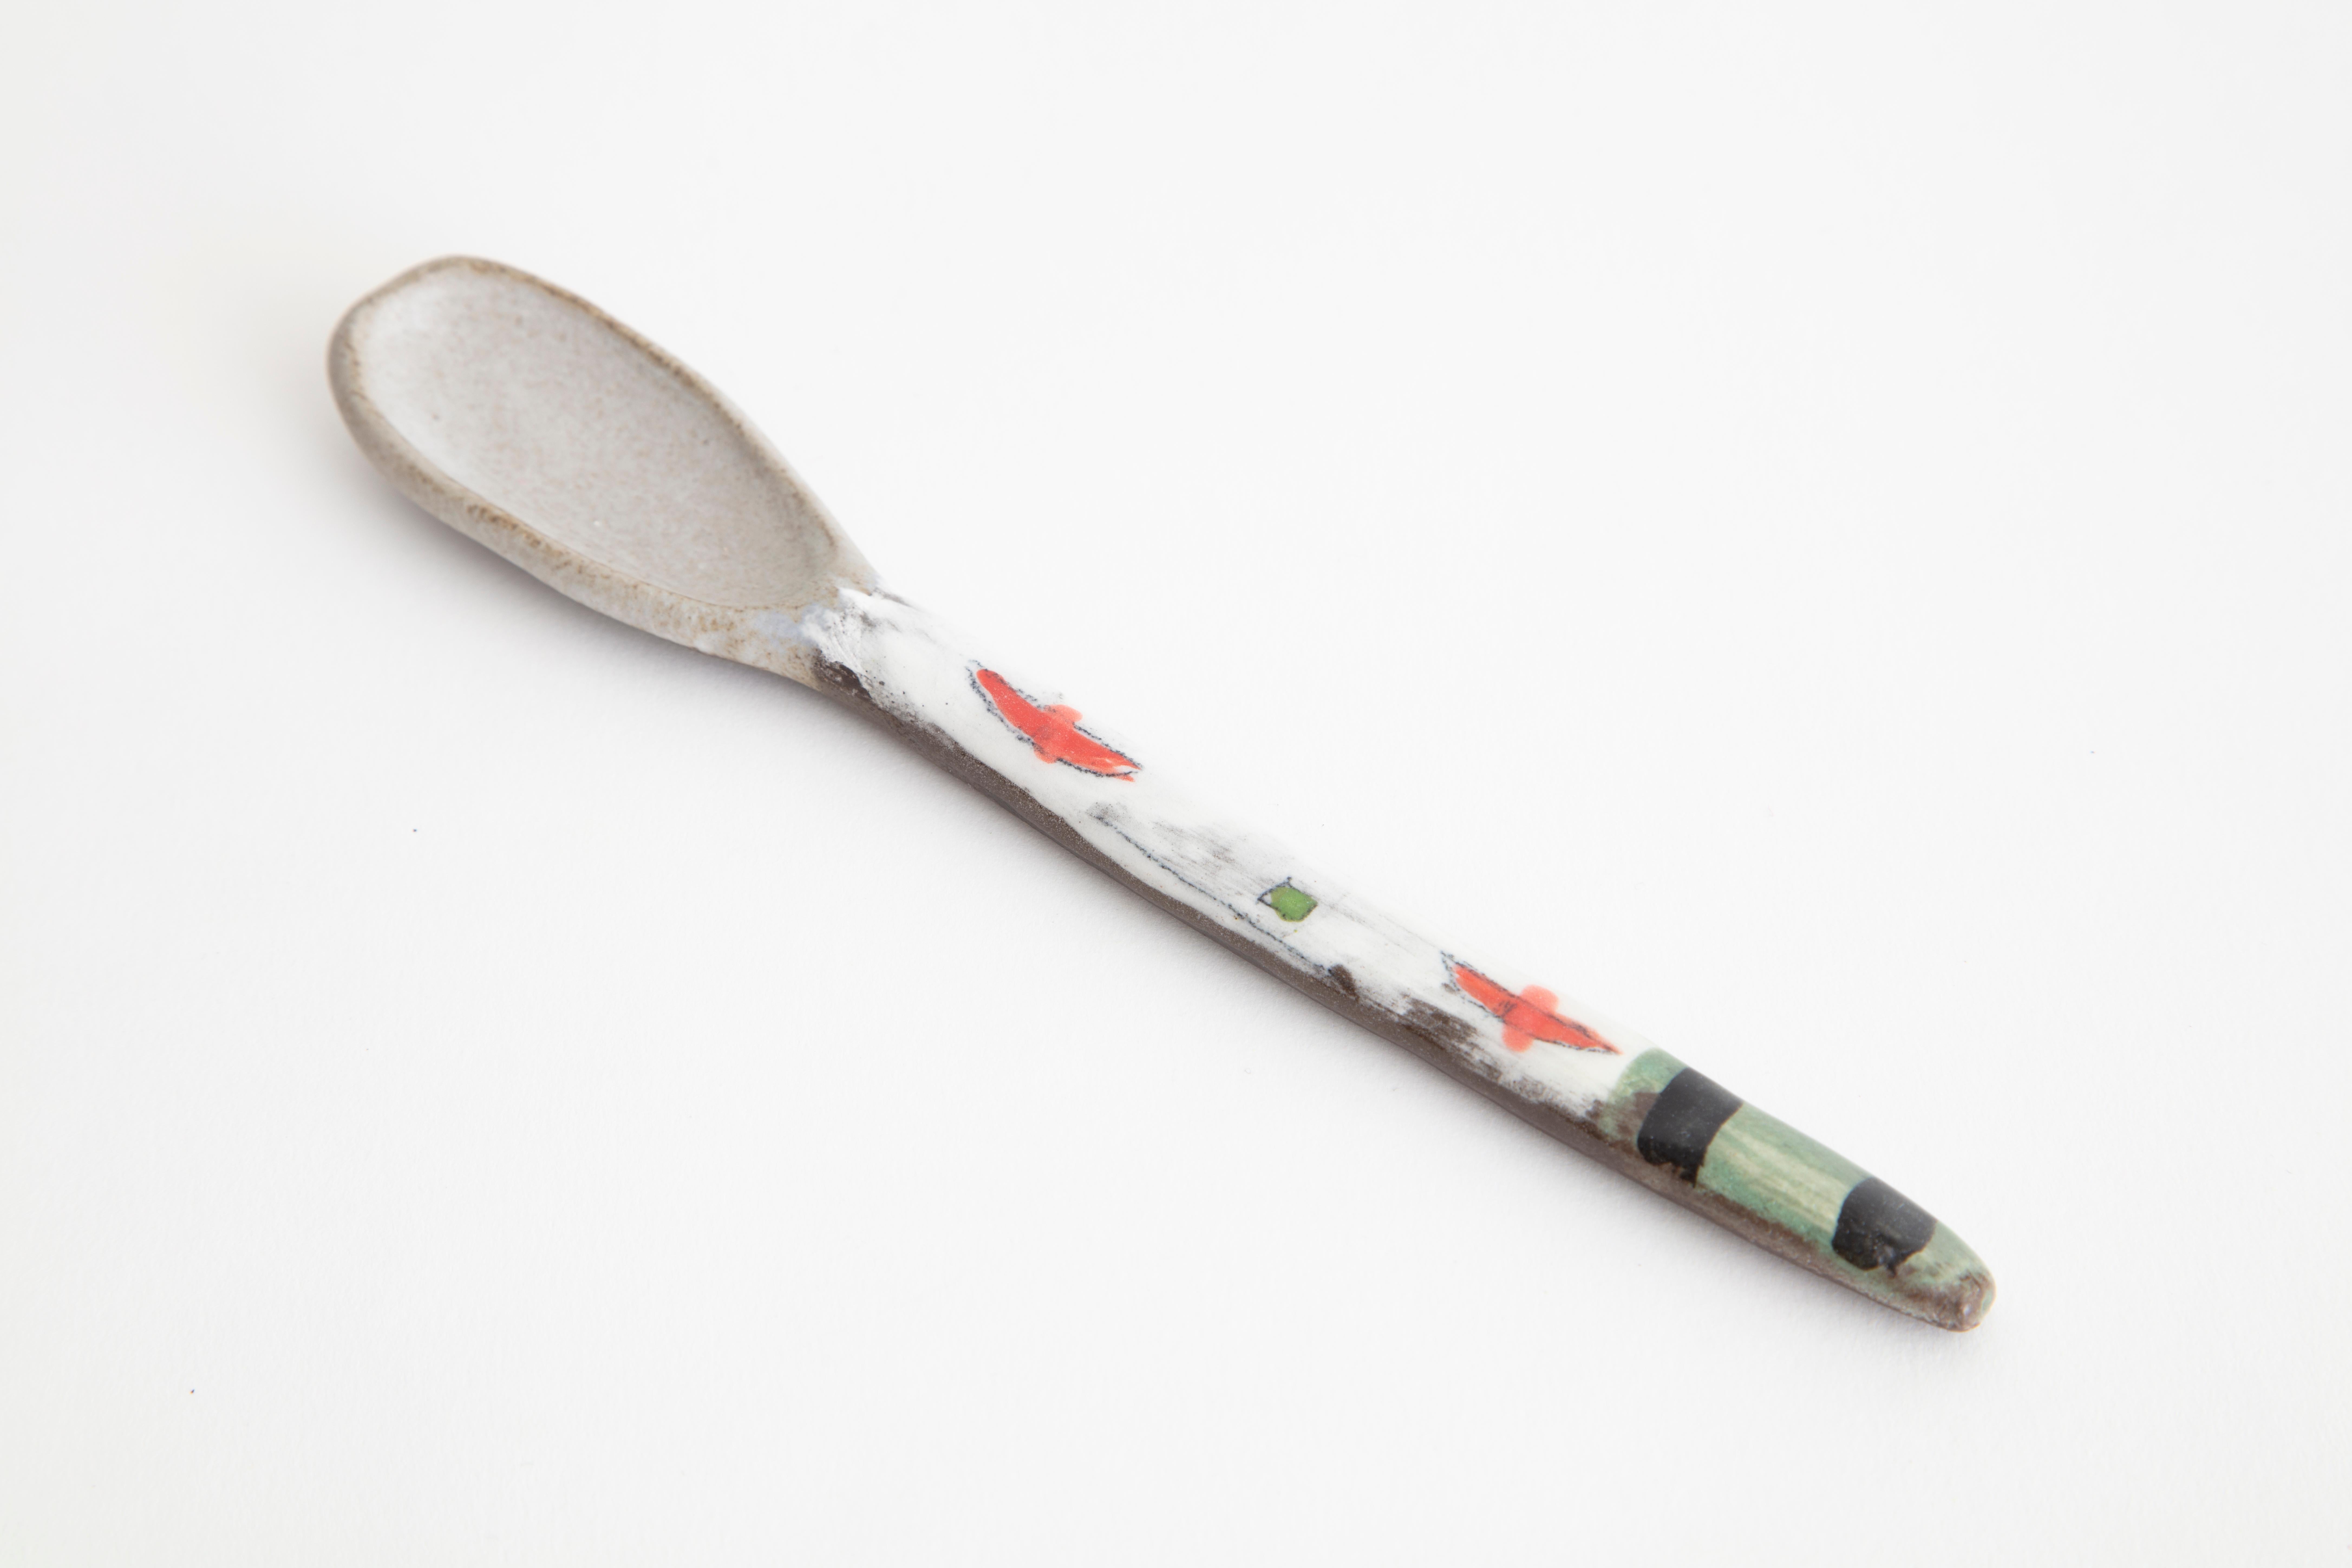 Part of the surrealist-inspired show the dinner guests, each ceramic smiley spoon is hand painted with anthropomorphic shapes and playful, brightly-colored patterns. 1 of 9.

Handmade by Shino Takeda
Materials: Hand painted ceramic
Dimensions: H